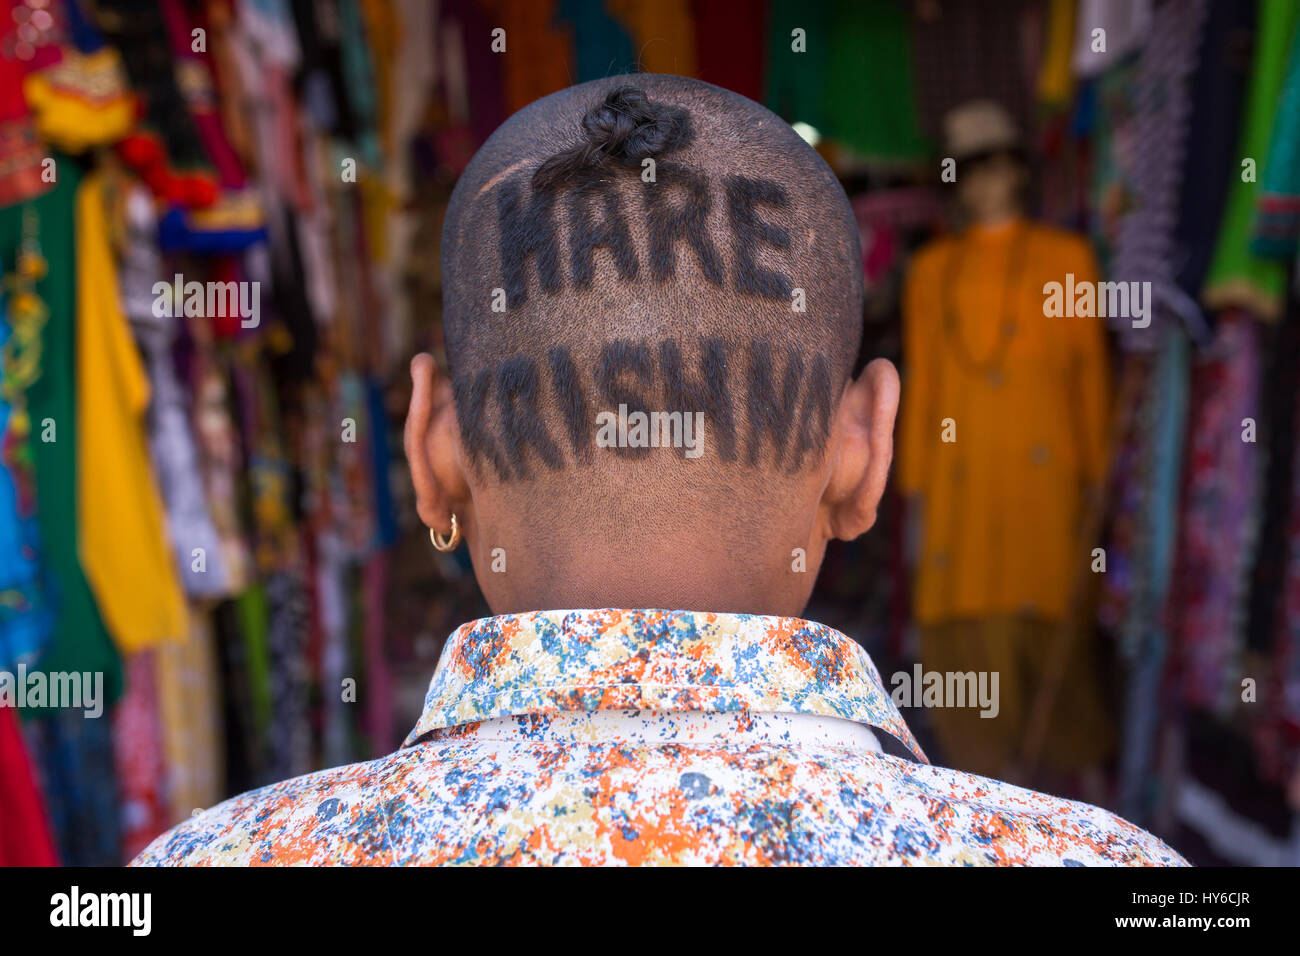 Vrindavan, India - March 22, 2016: Portrati of an unidentified indian man with a 'Hare Krishna' haircut in holy Krishna Vrindavan city, India Stock Photo